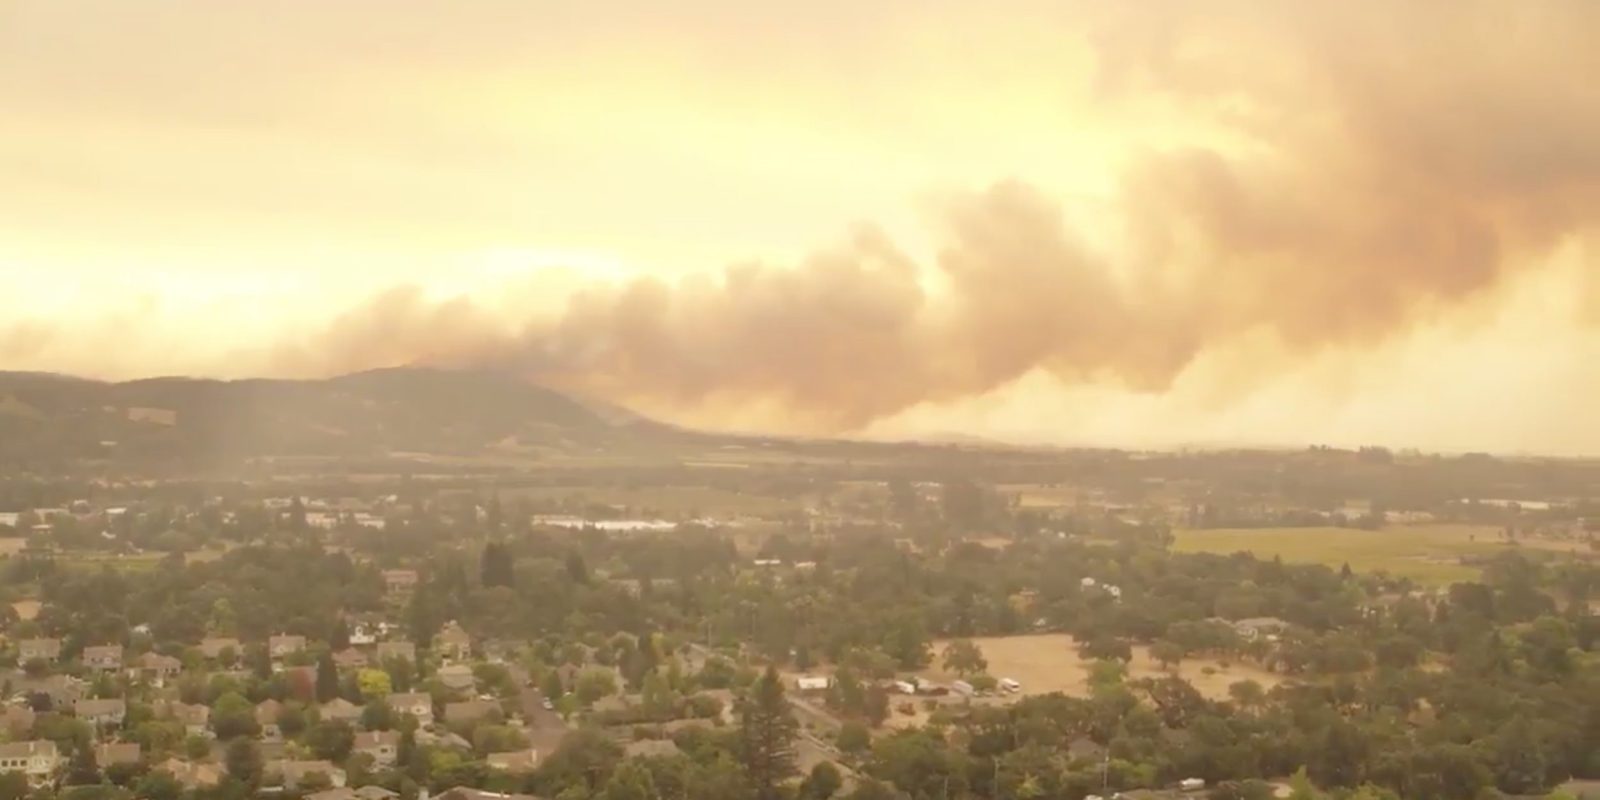 Drone footage shows fast moving wildfires in Napa and Sonoma counties